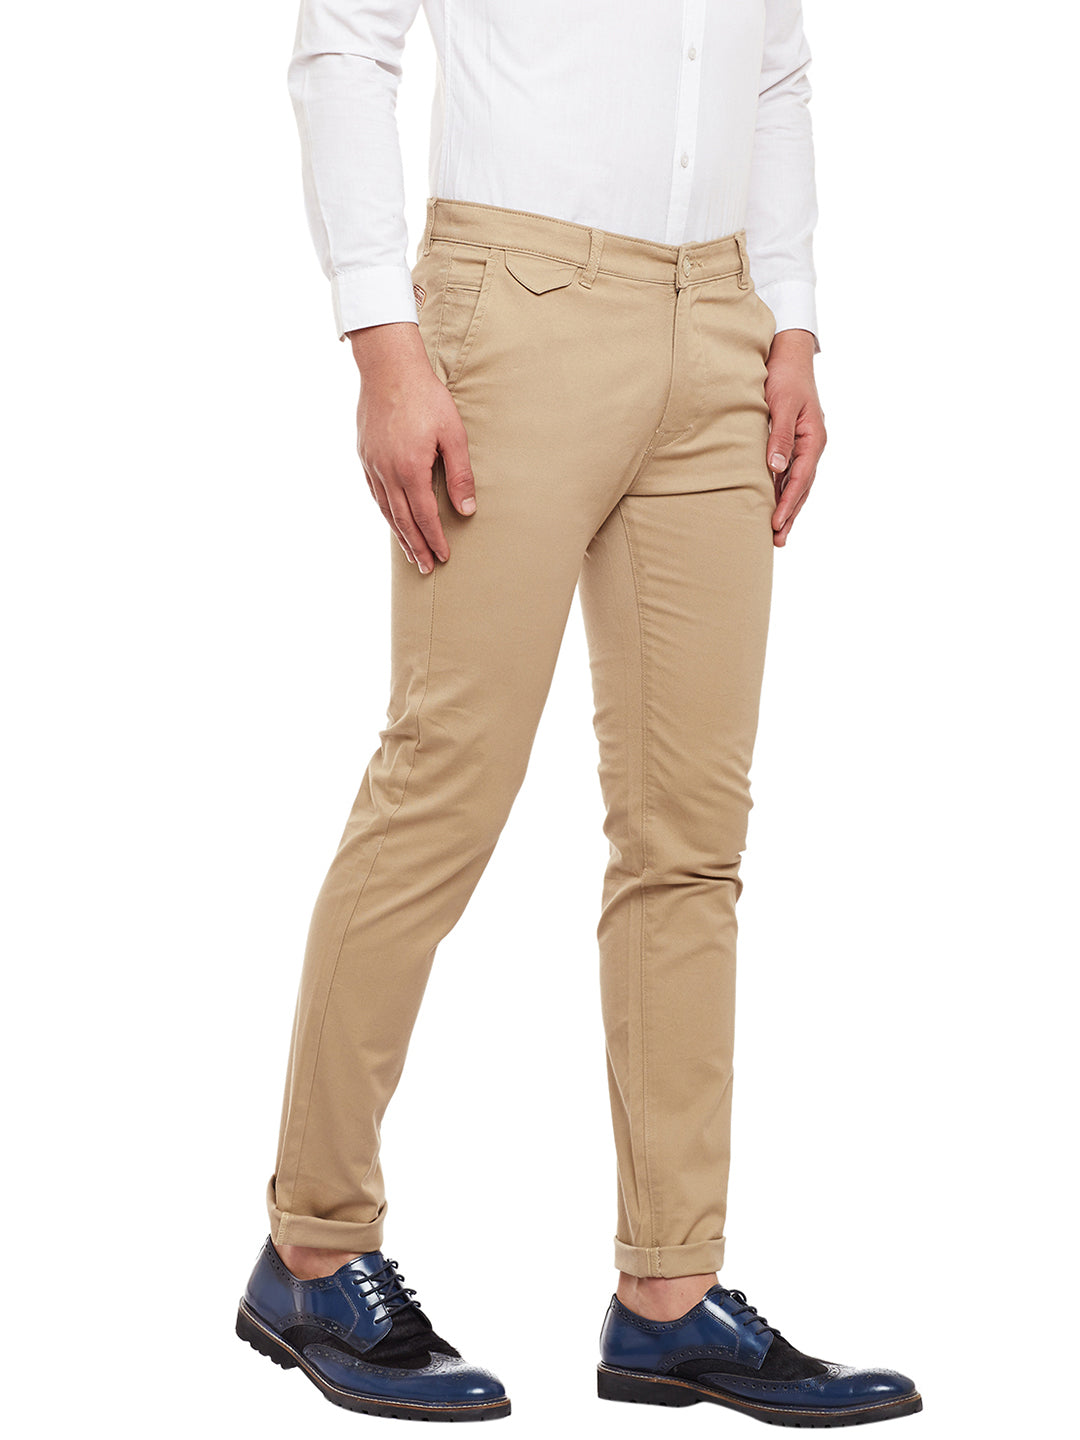 Men Beige Solid  Cotton Stretch Slim Fit Casual Chinos Trouser